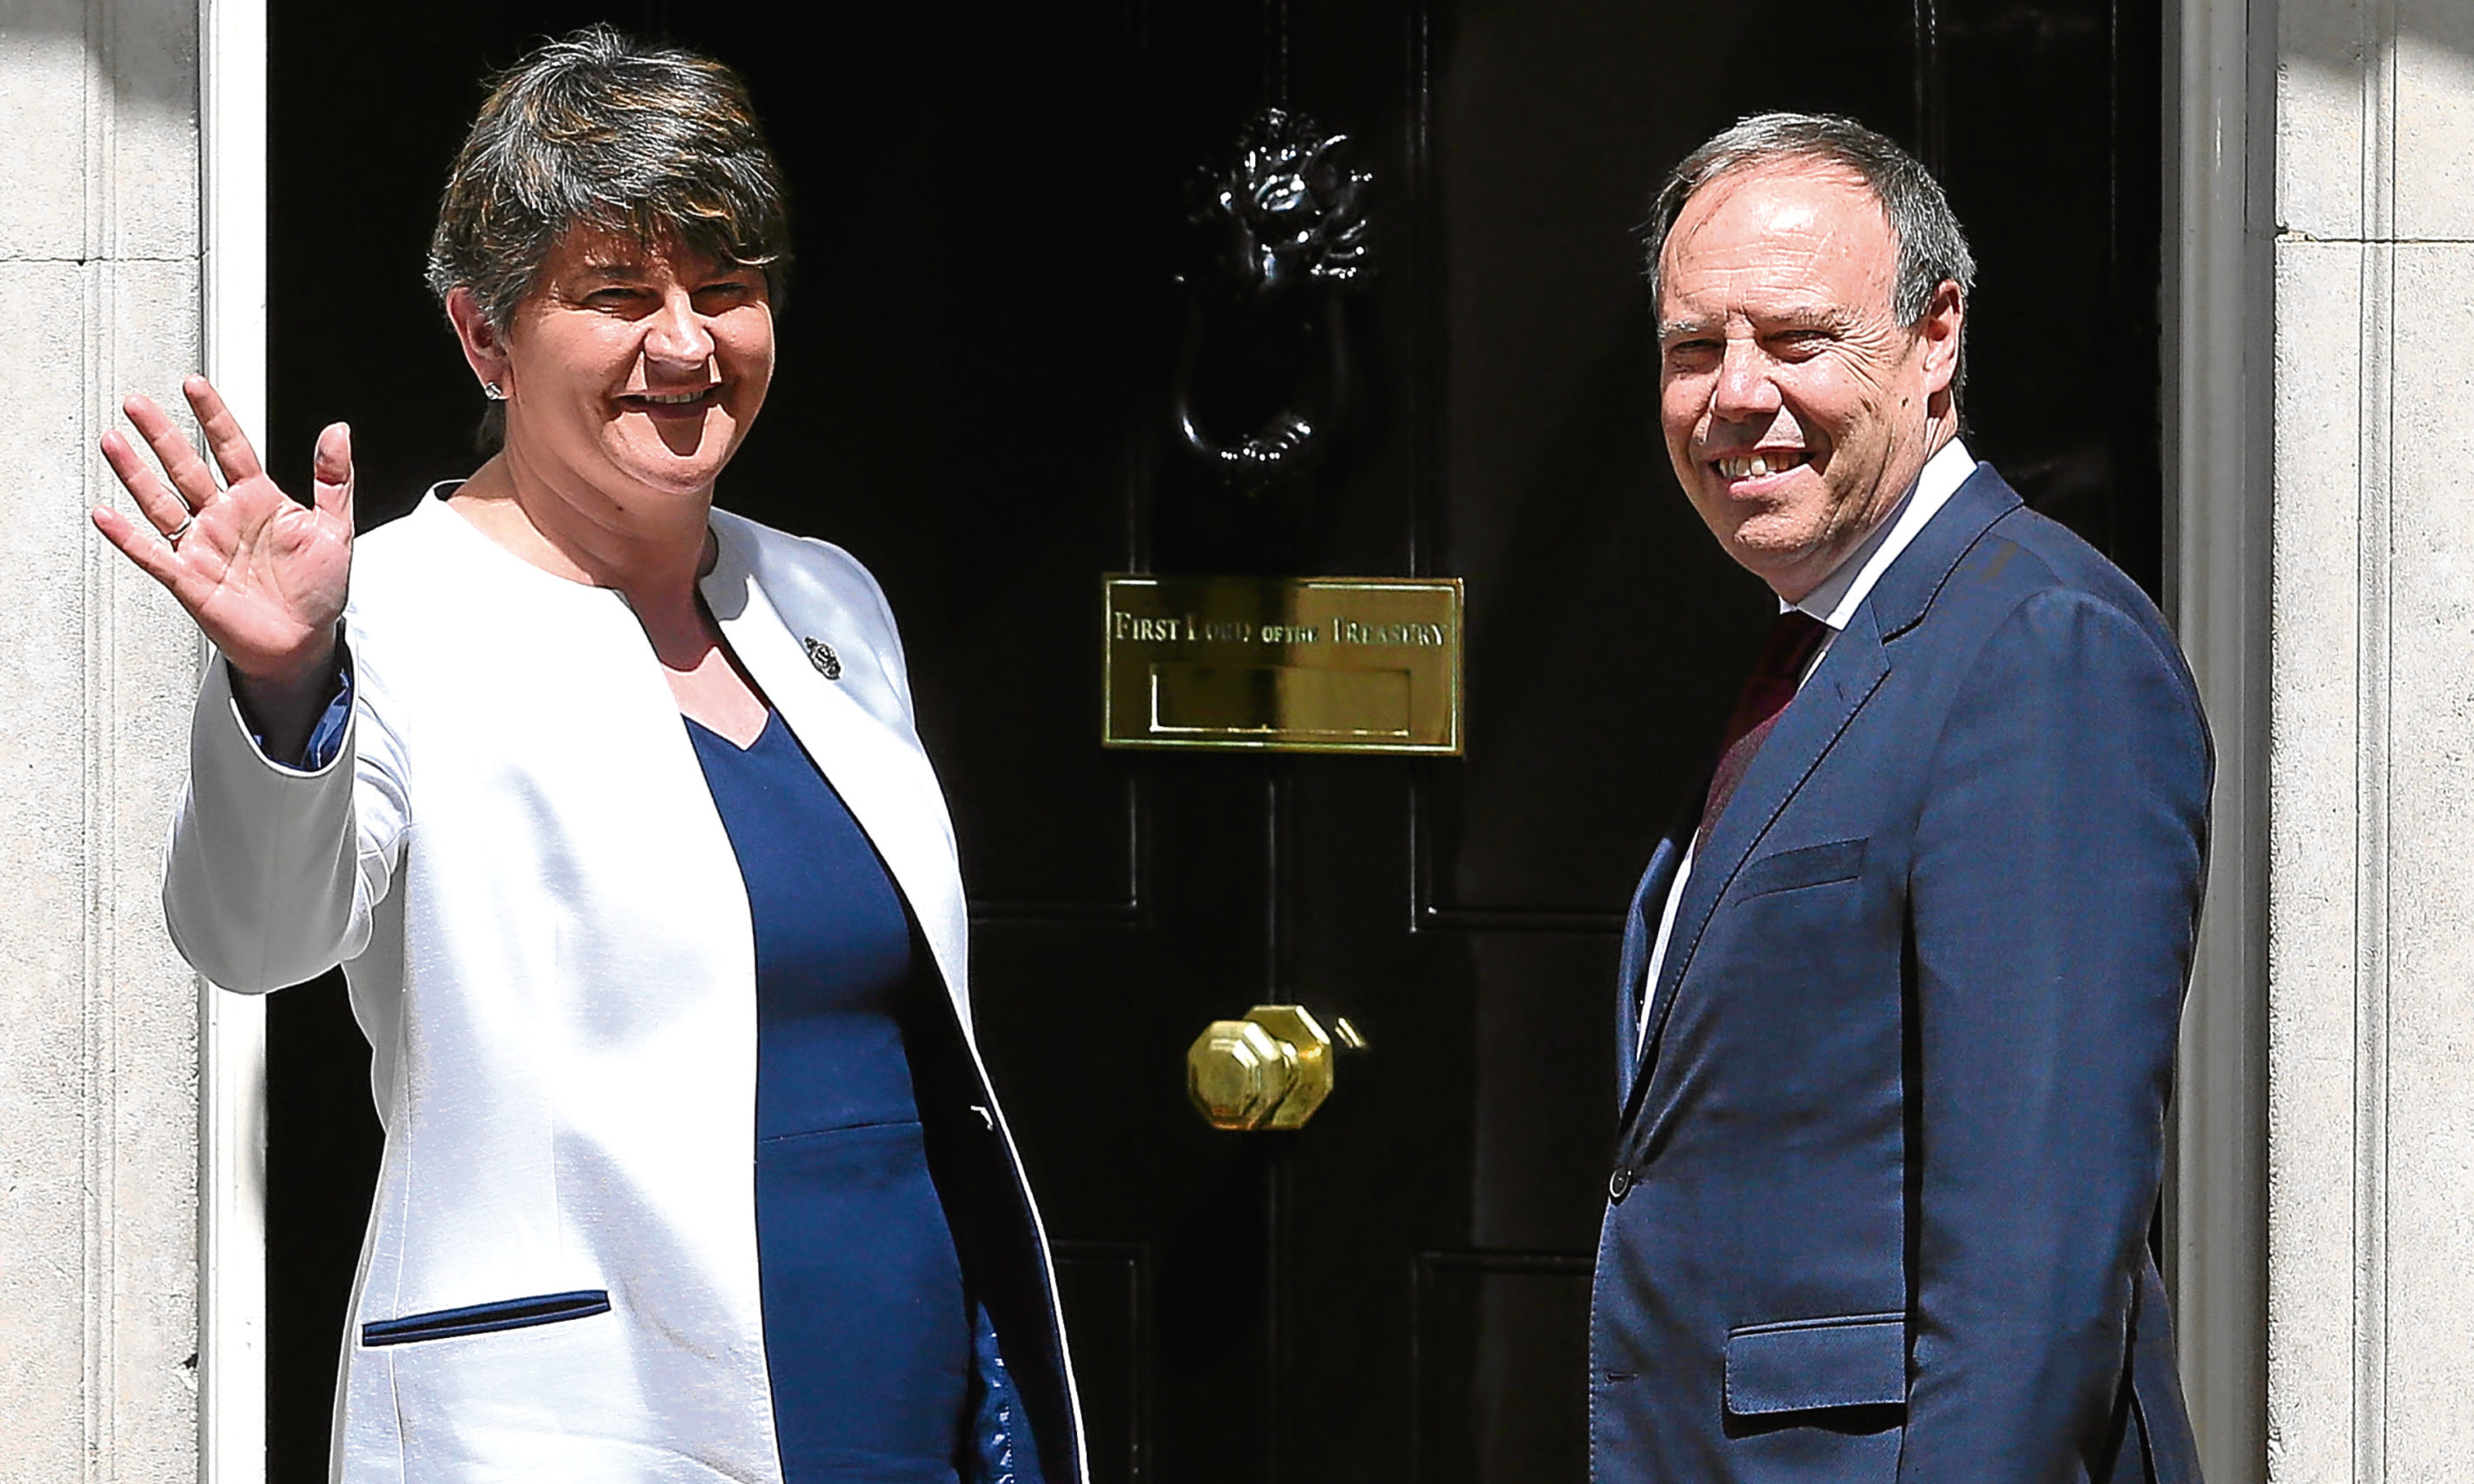 DUP leader Arlene Foster and MP Nigel Dodds arrive at 10 Downing Street for talks with Theresa 
May, a development that concerns Alex.